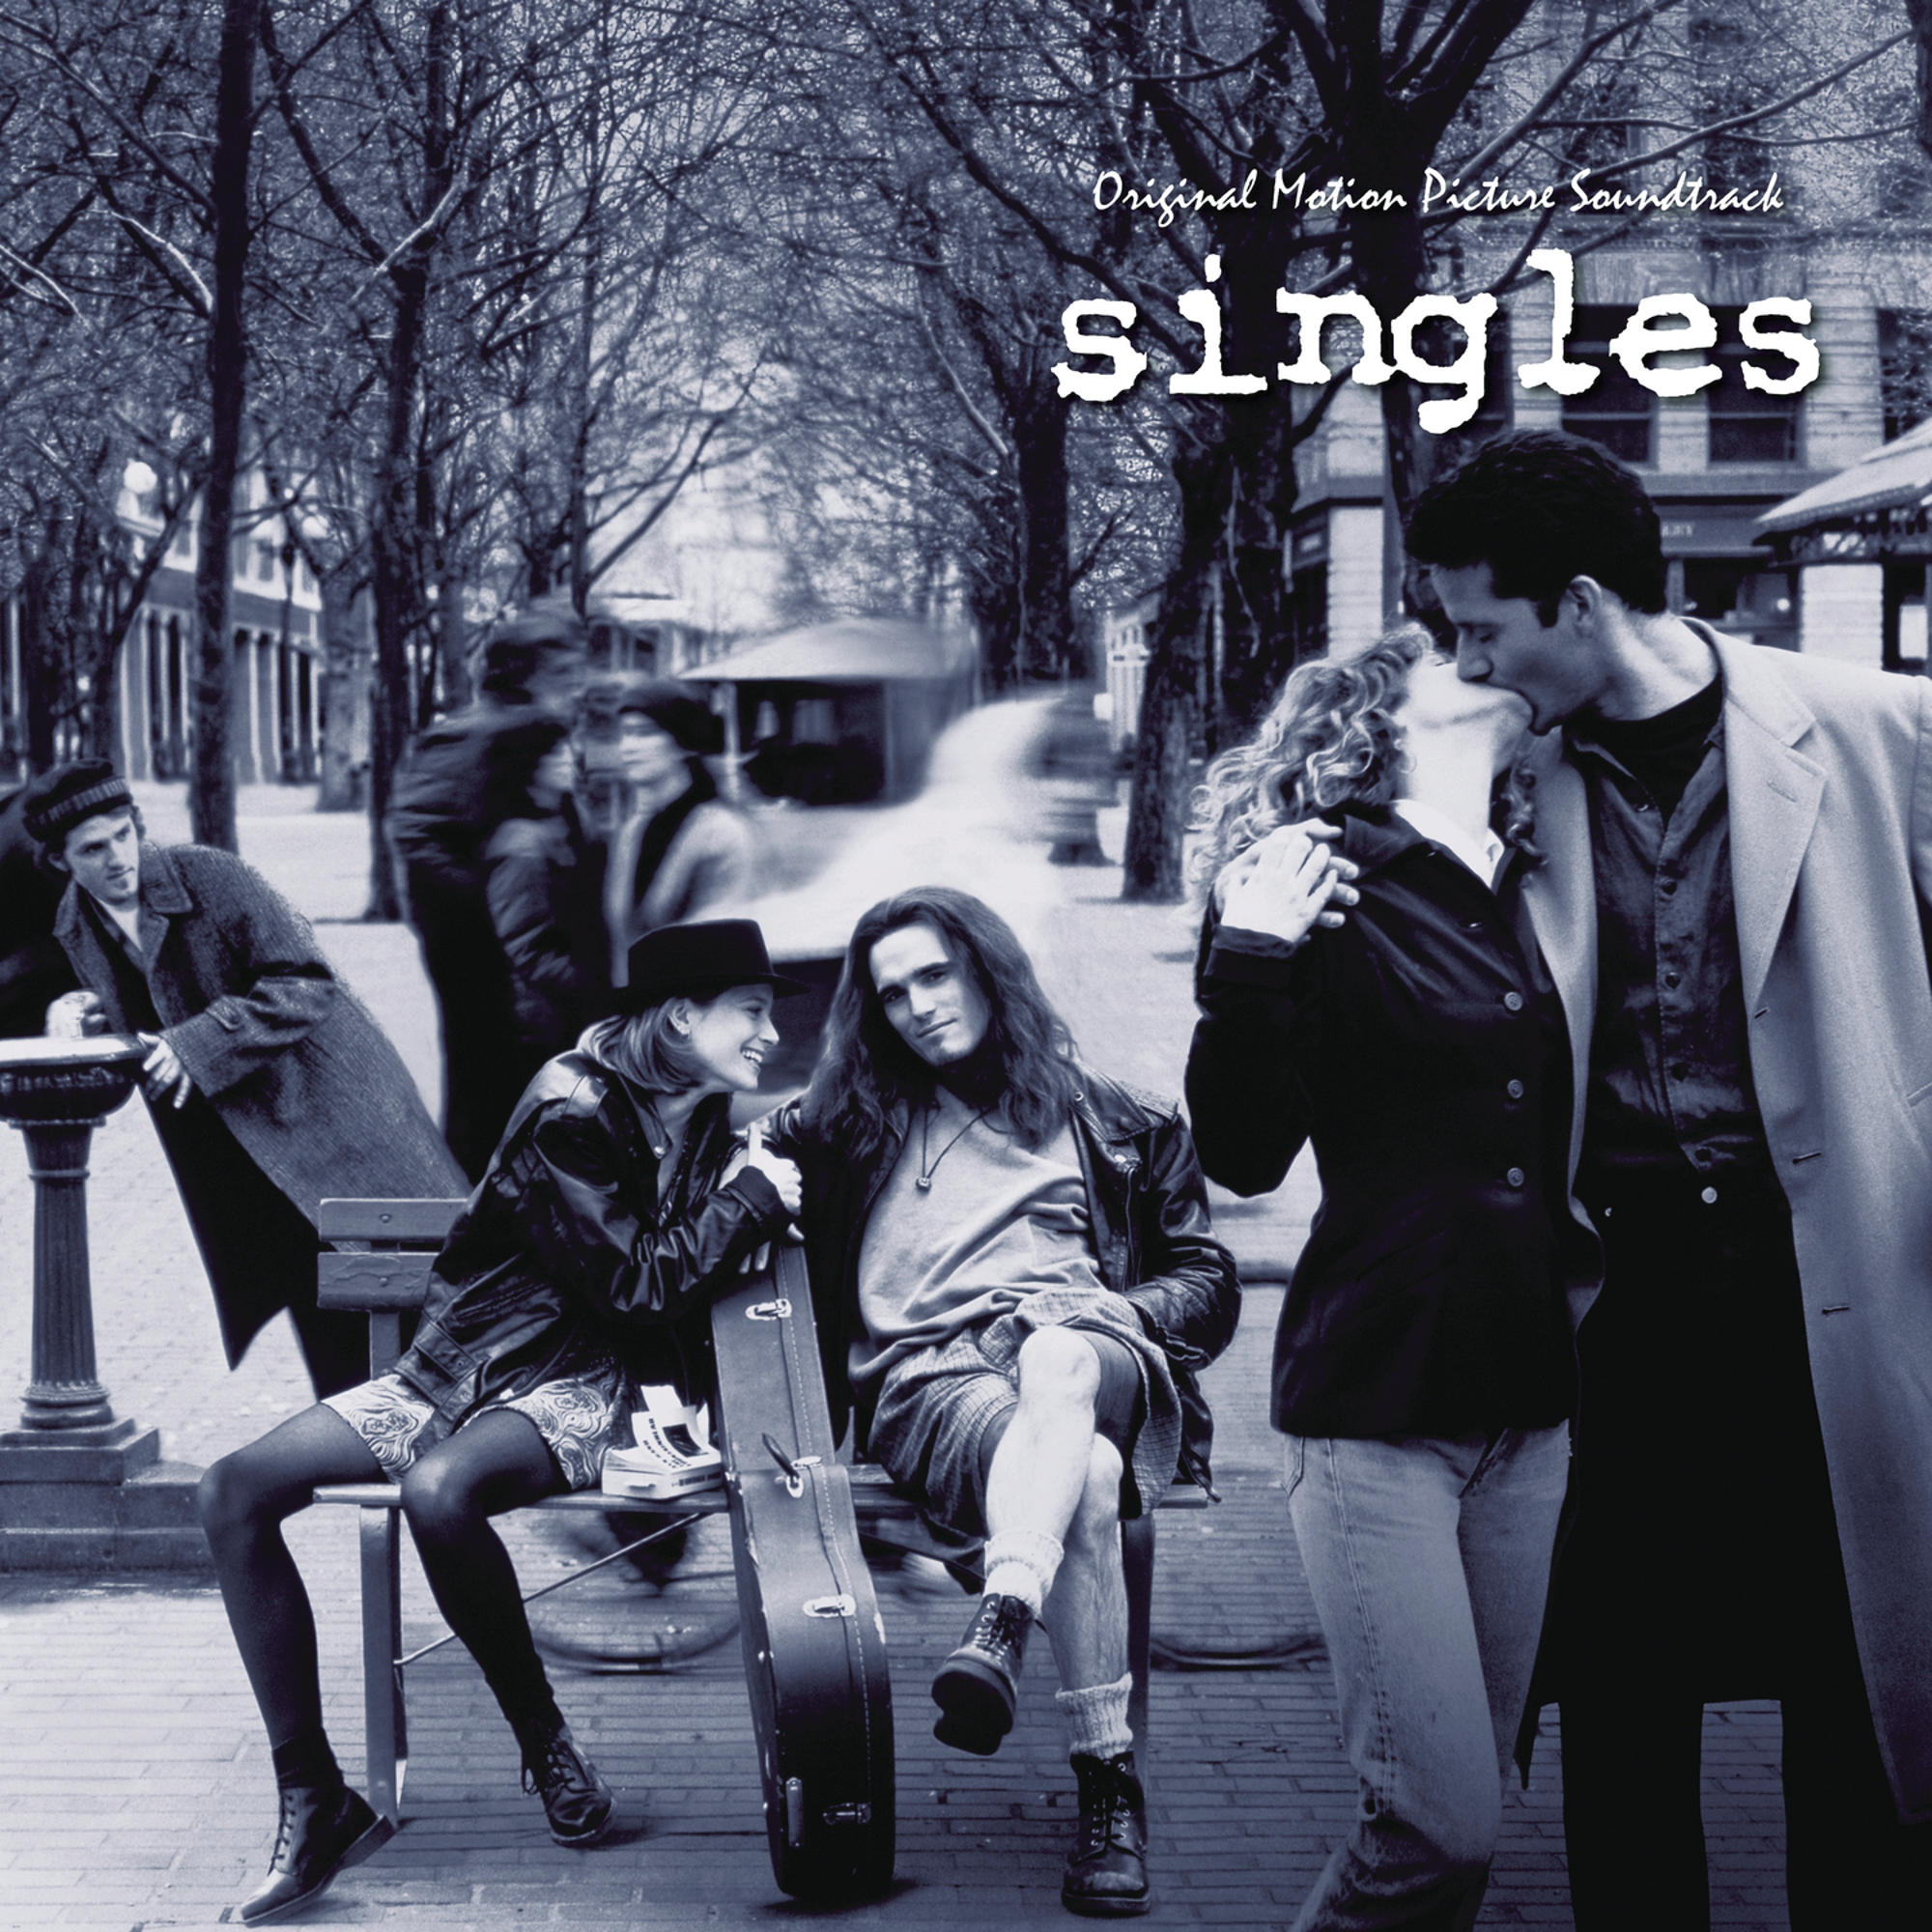 VARIOUS - Singles/OST - (CD) (Deluxe Edition)